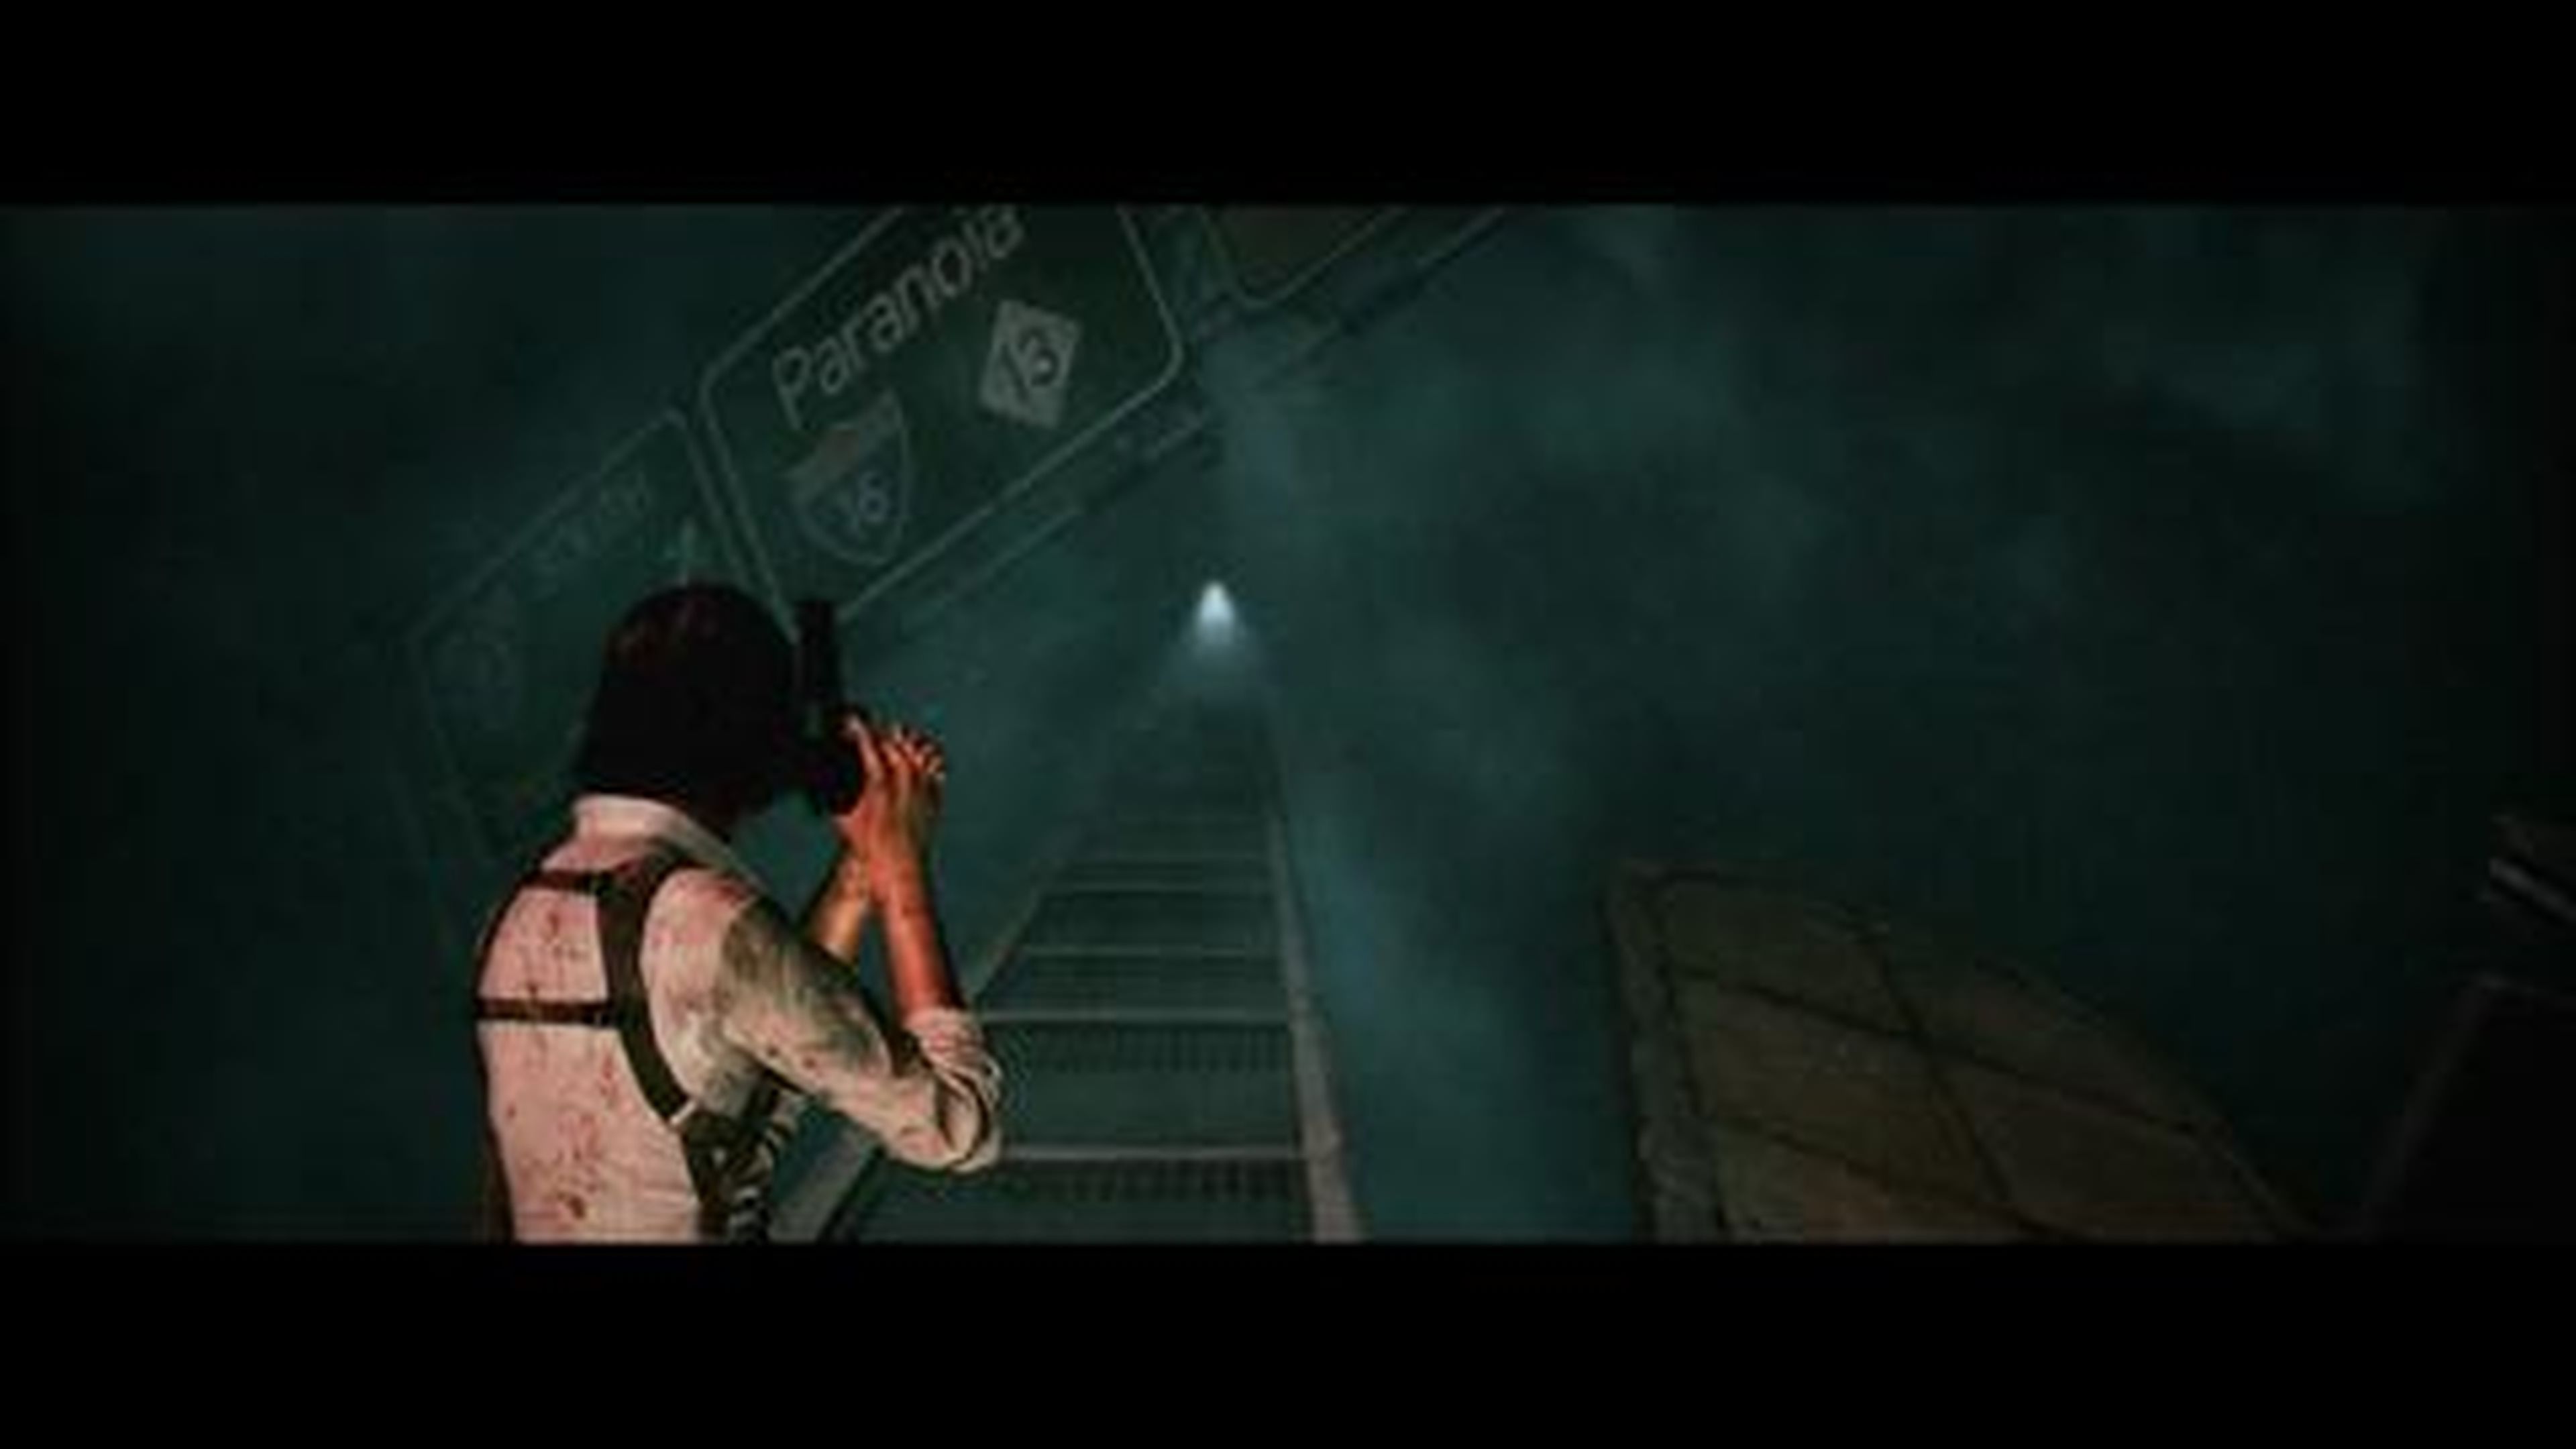 The Evil Within- The Consequence - Gameplay Teaser